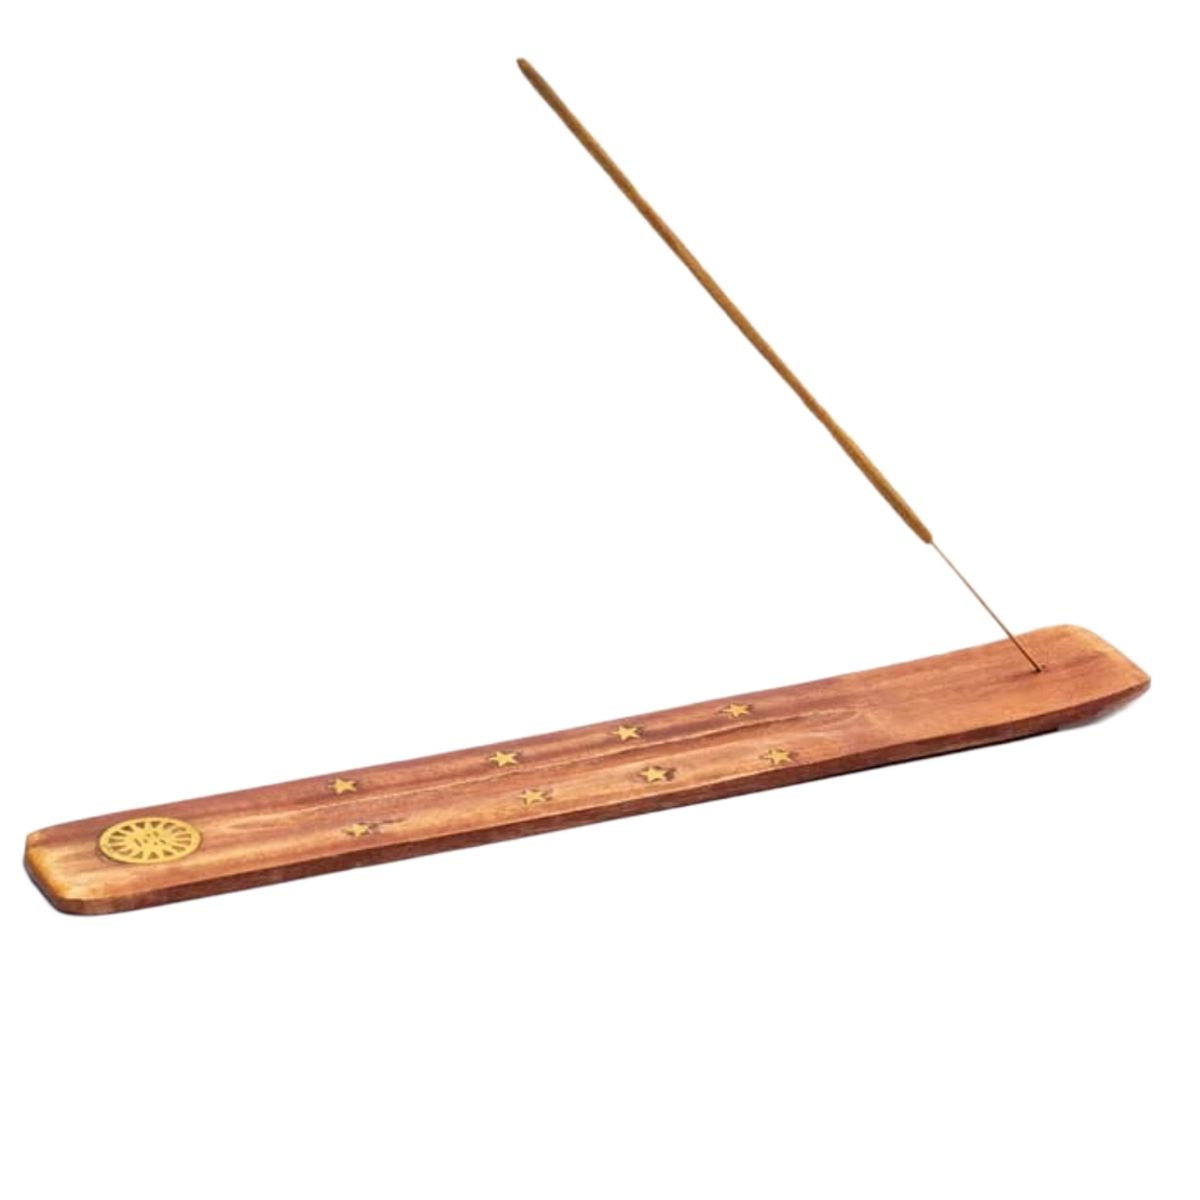 Incense Satya Opium 15 grams or about 15 Sticks